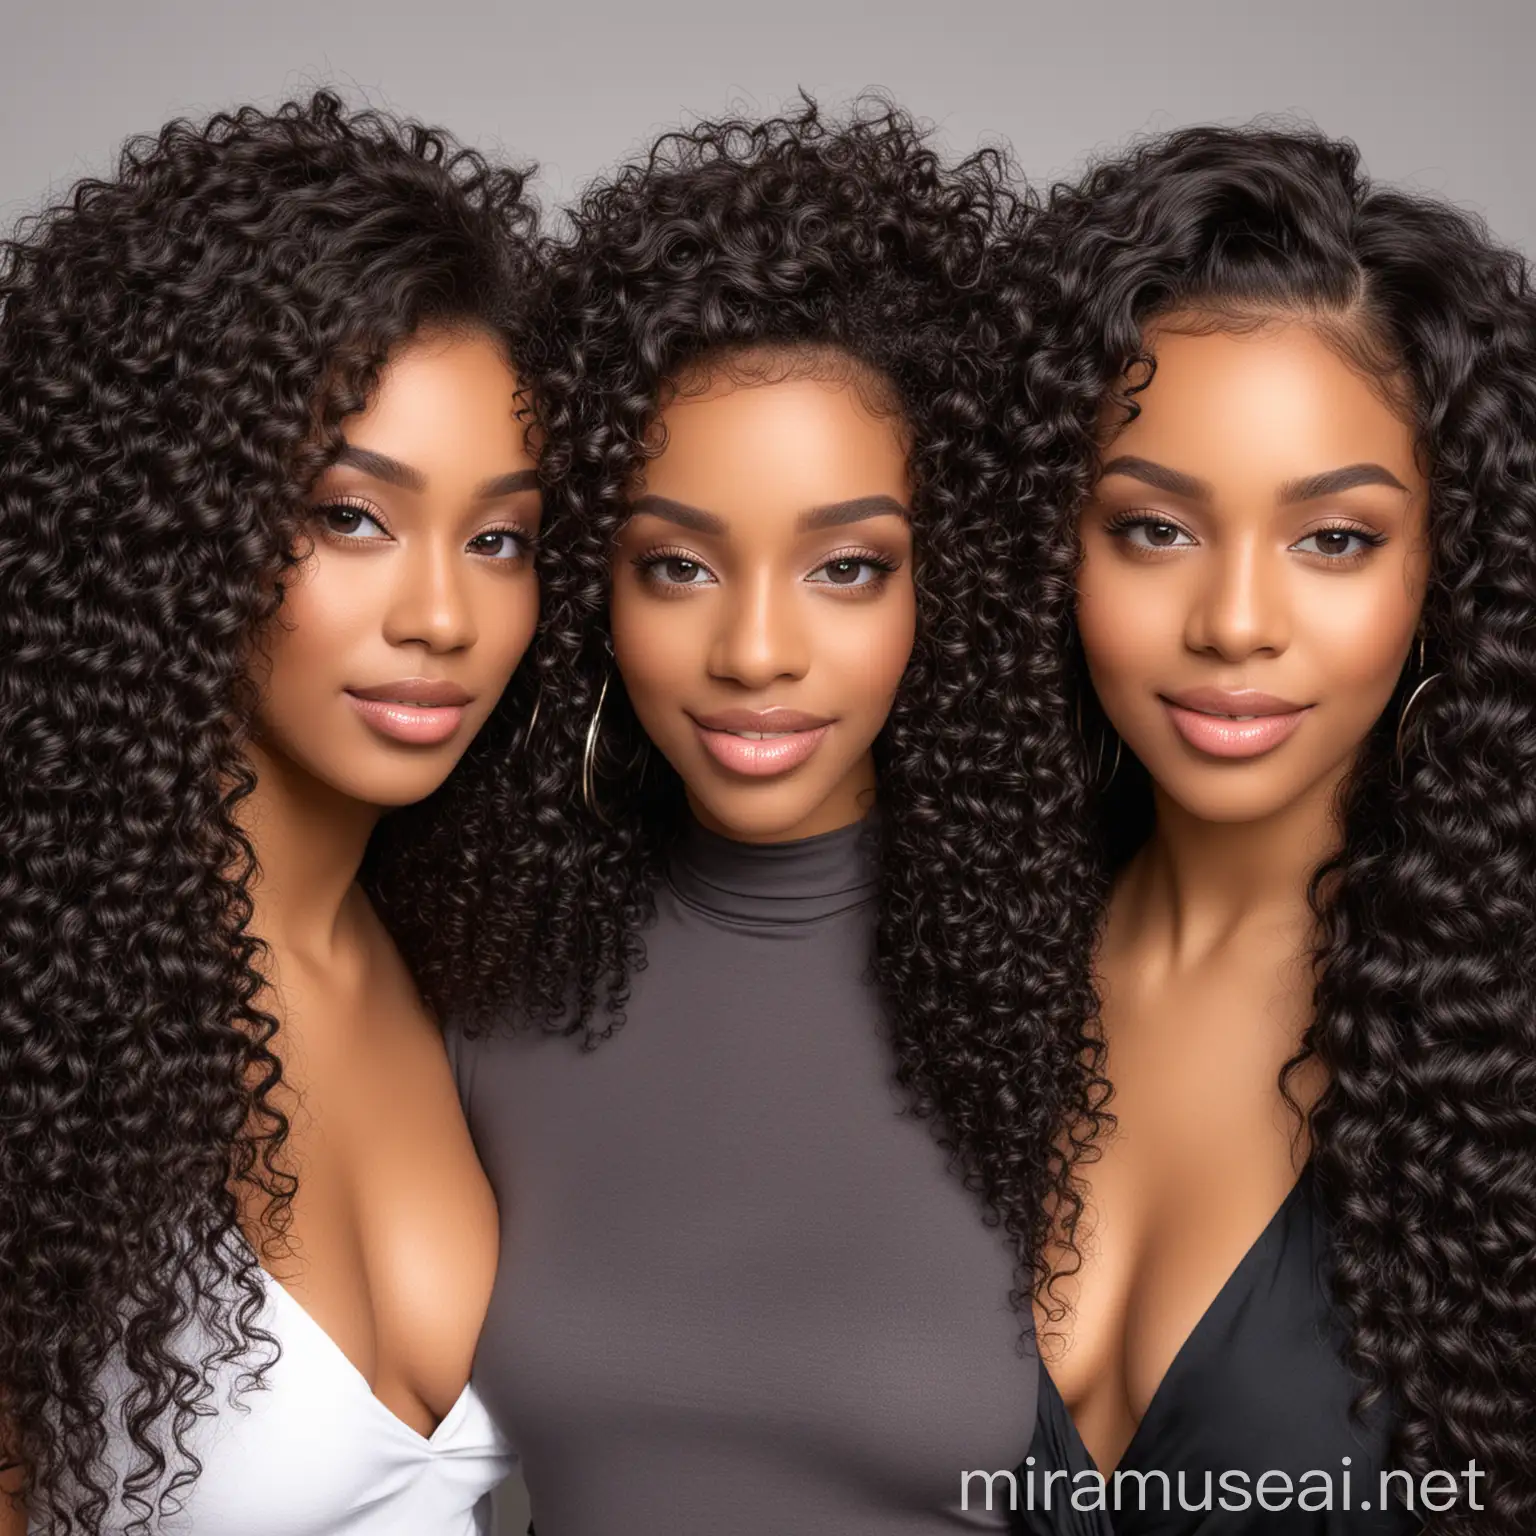 three beautiful black women, each showcasing a different hairstyle: one with luxurious body wave hair, another with voluminous kinky curly hair, and the third with sleek straight hair.